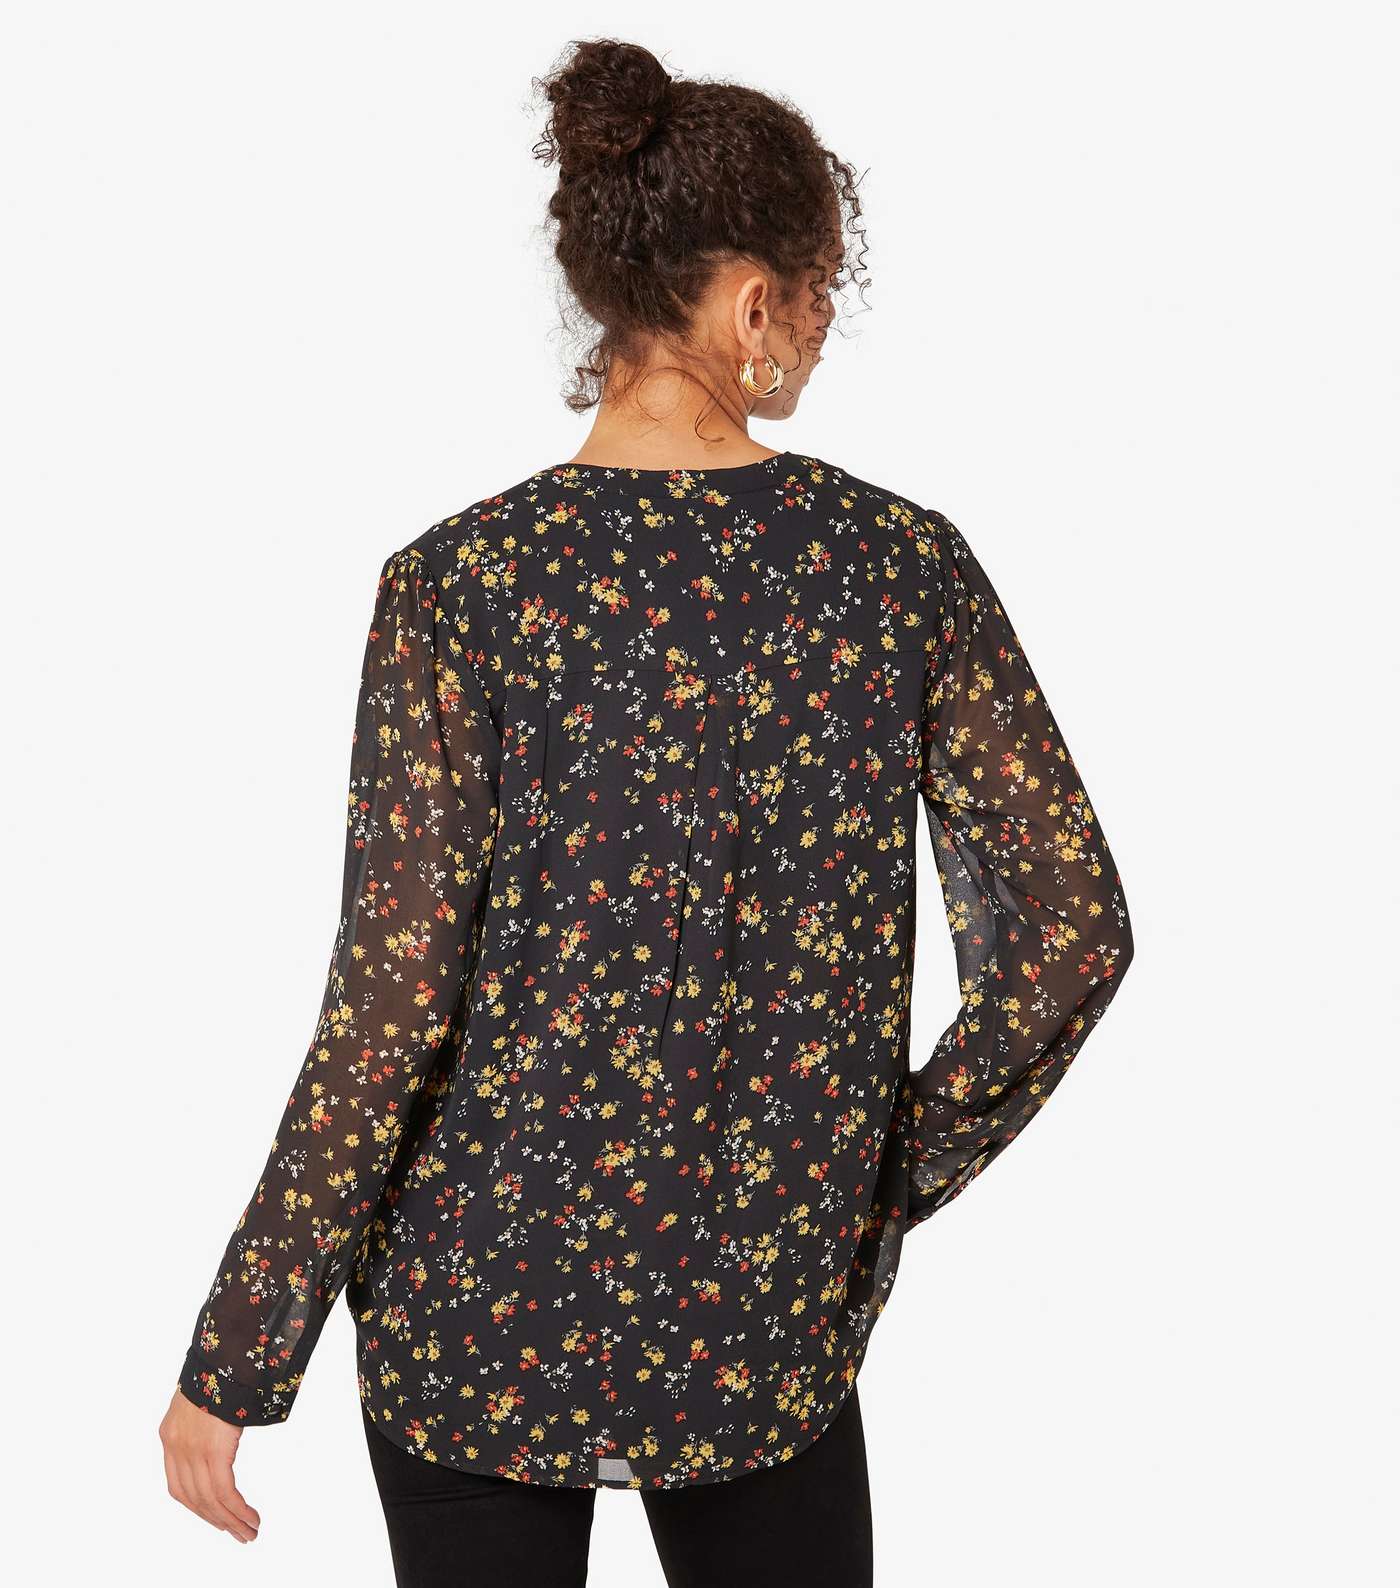 Apricot Black Ditsy Floral Long Sleeve Top Image 3